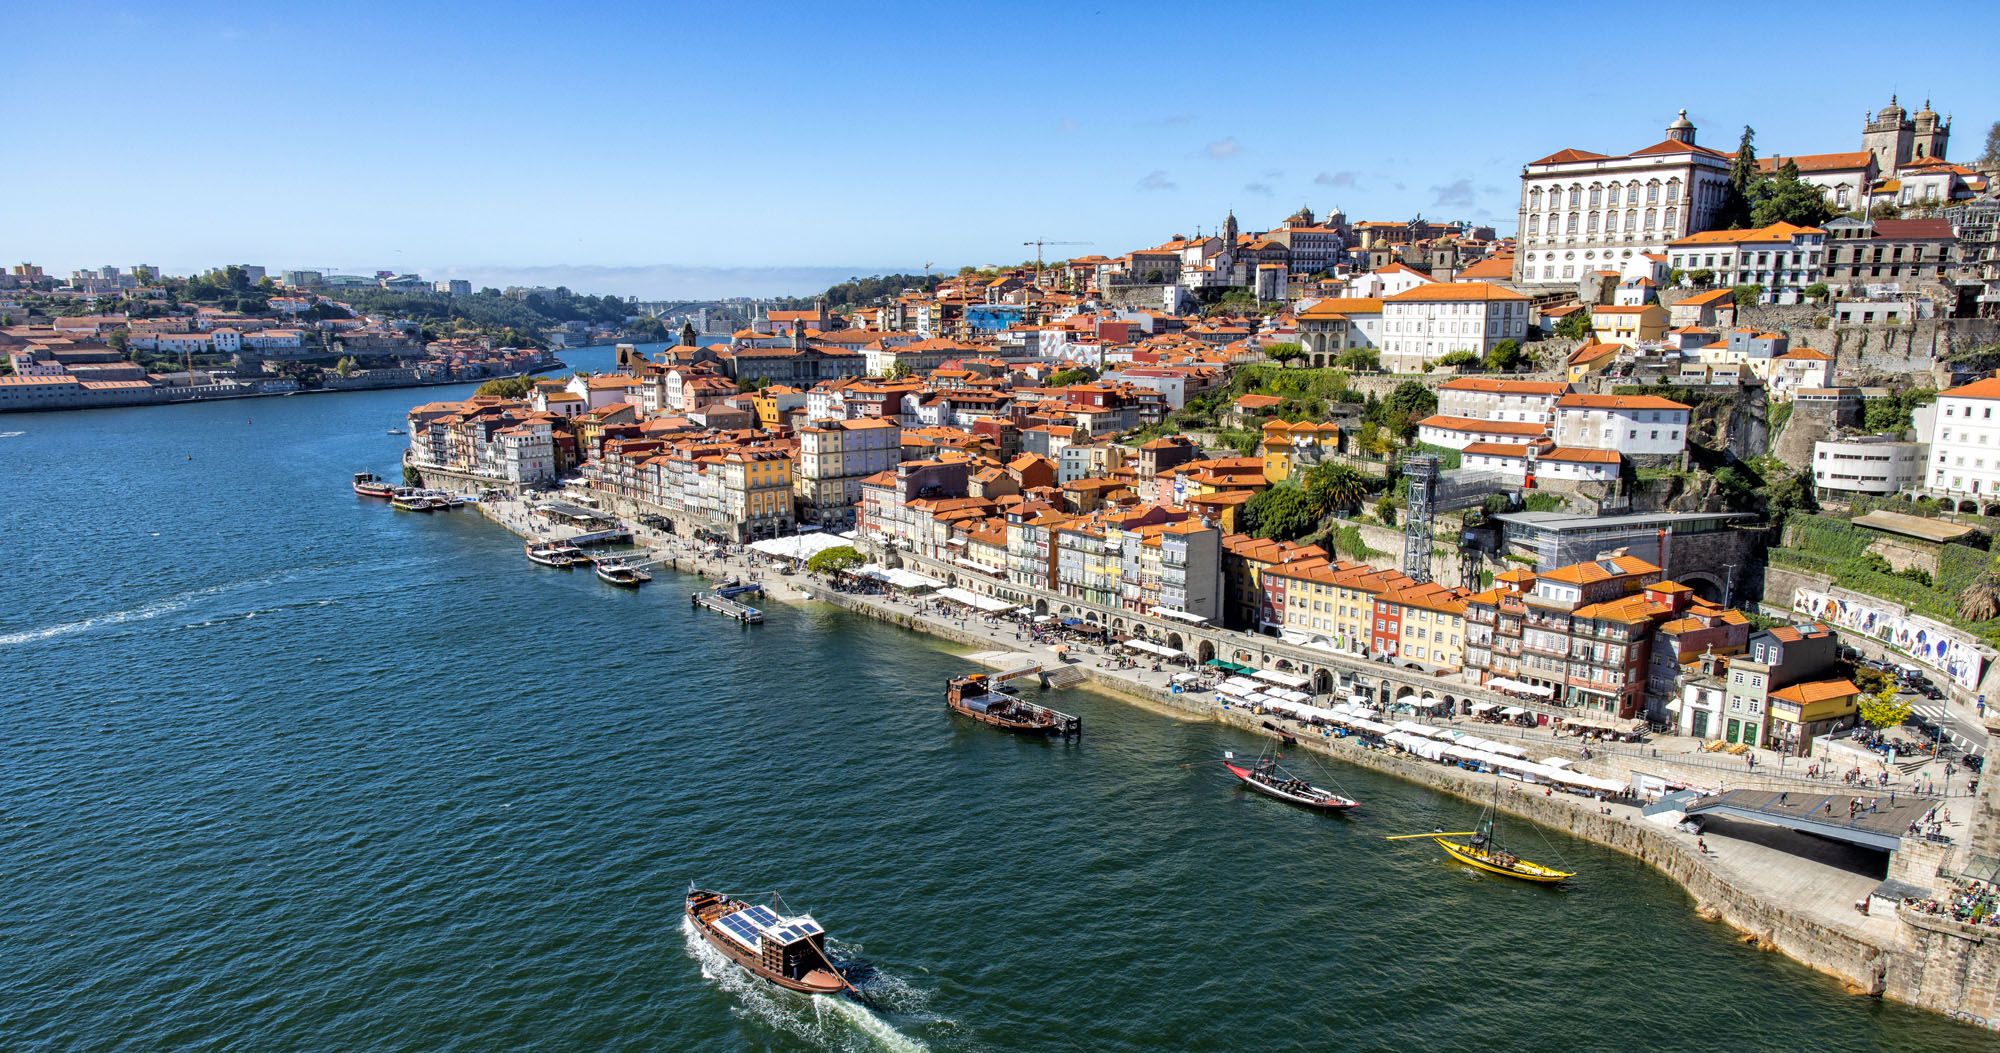 Featured image for “Porto Bucket List: 30 Amazing Things to Do in Porto, Portugal”